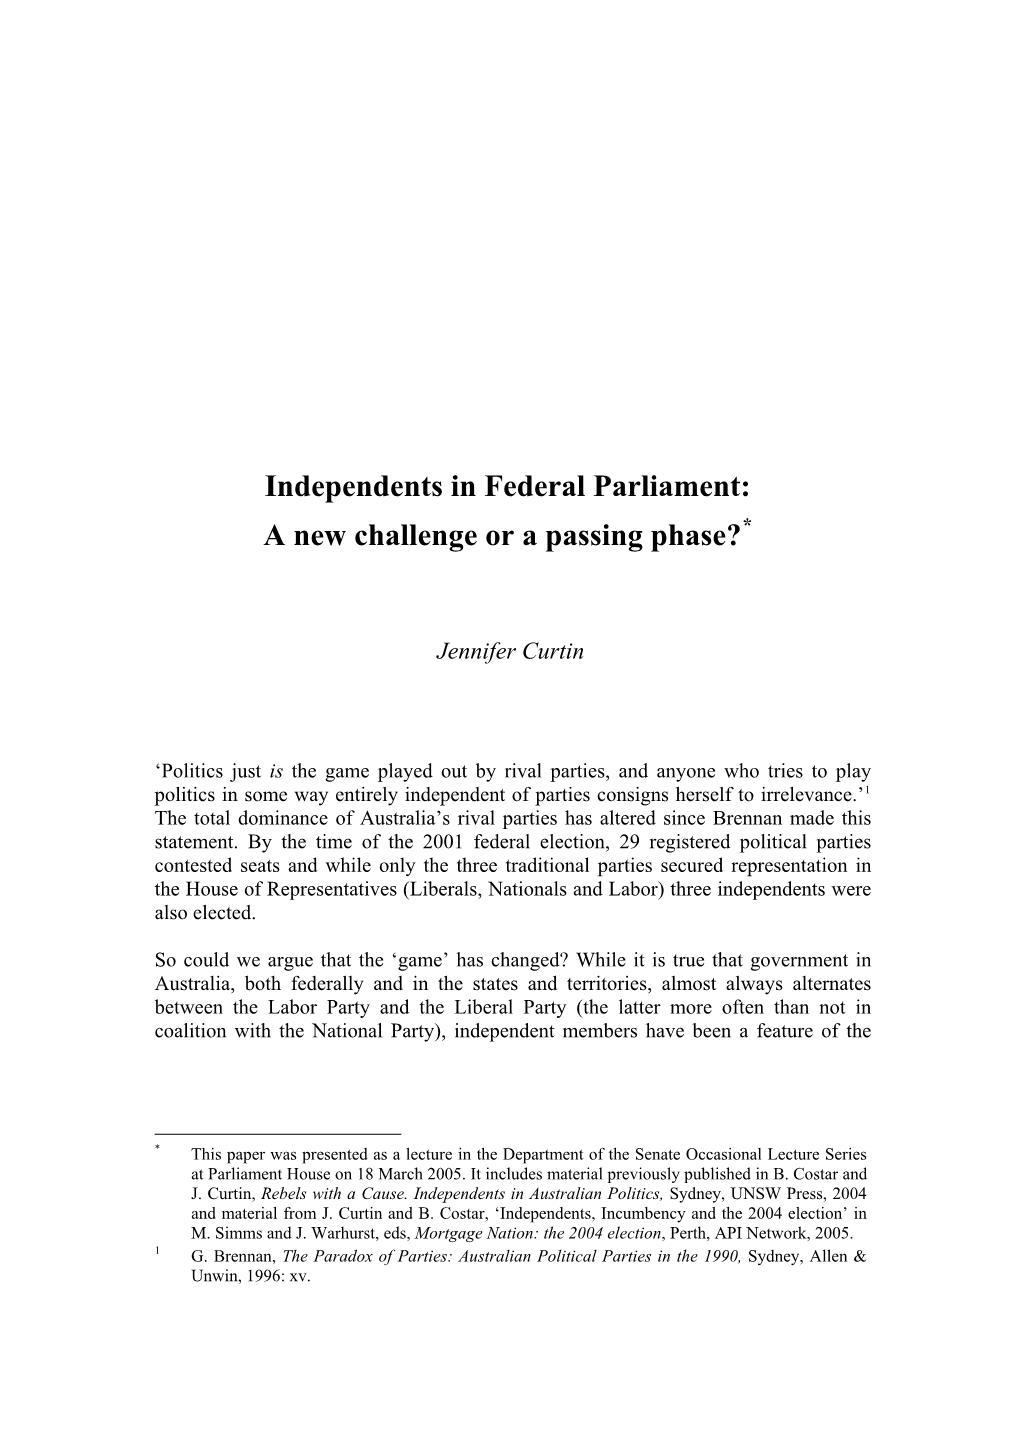 Independents in Federal Parliament: a New Challenge Or a Passing Phase?*